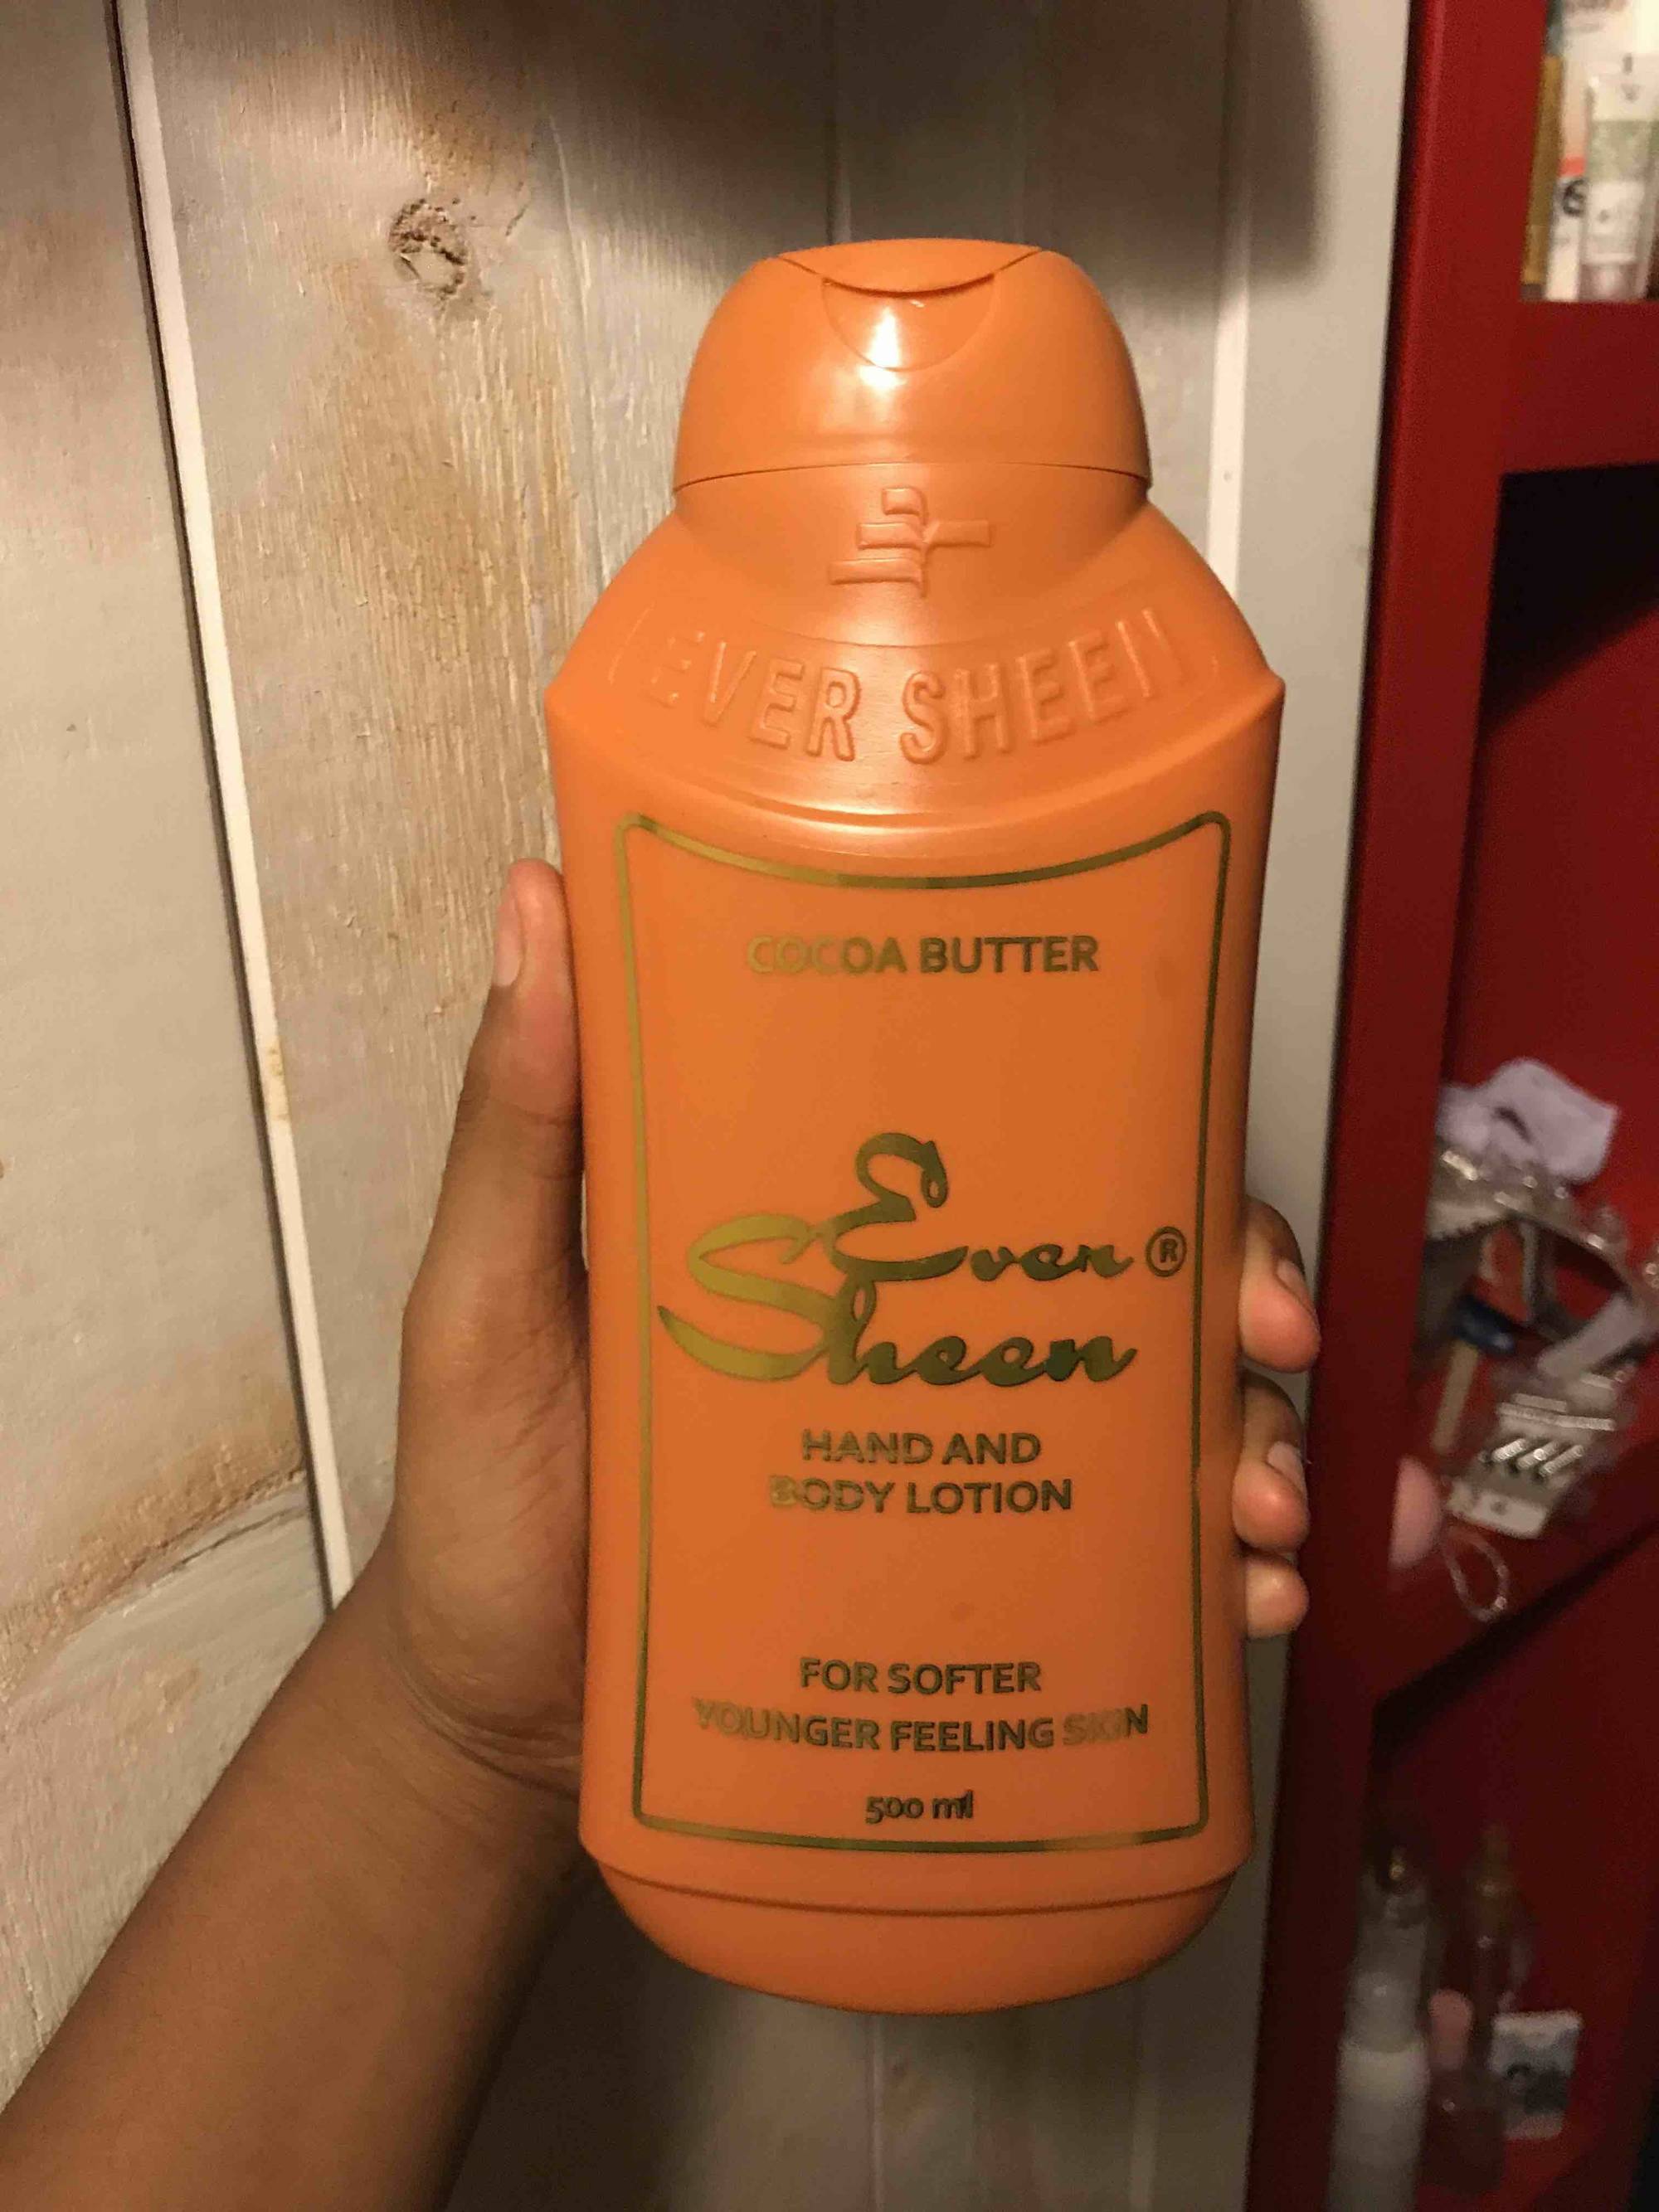 EVER SHEEN - Cocoa butter - Hand and body lotion